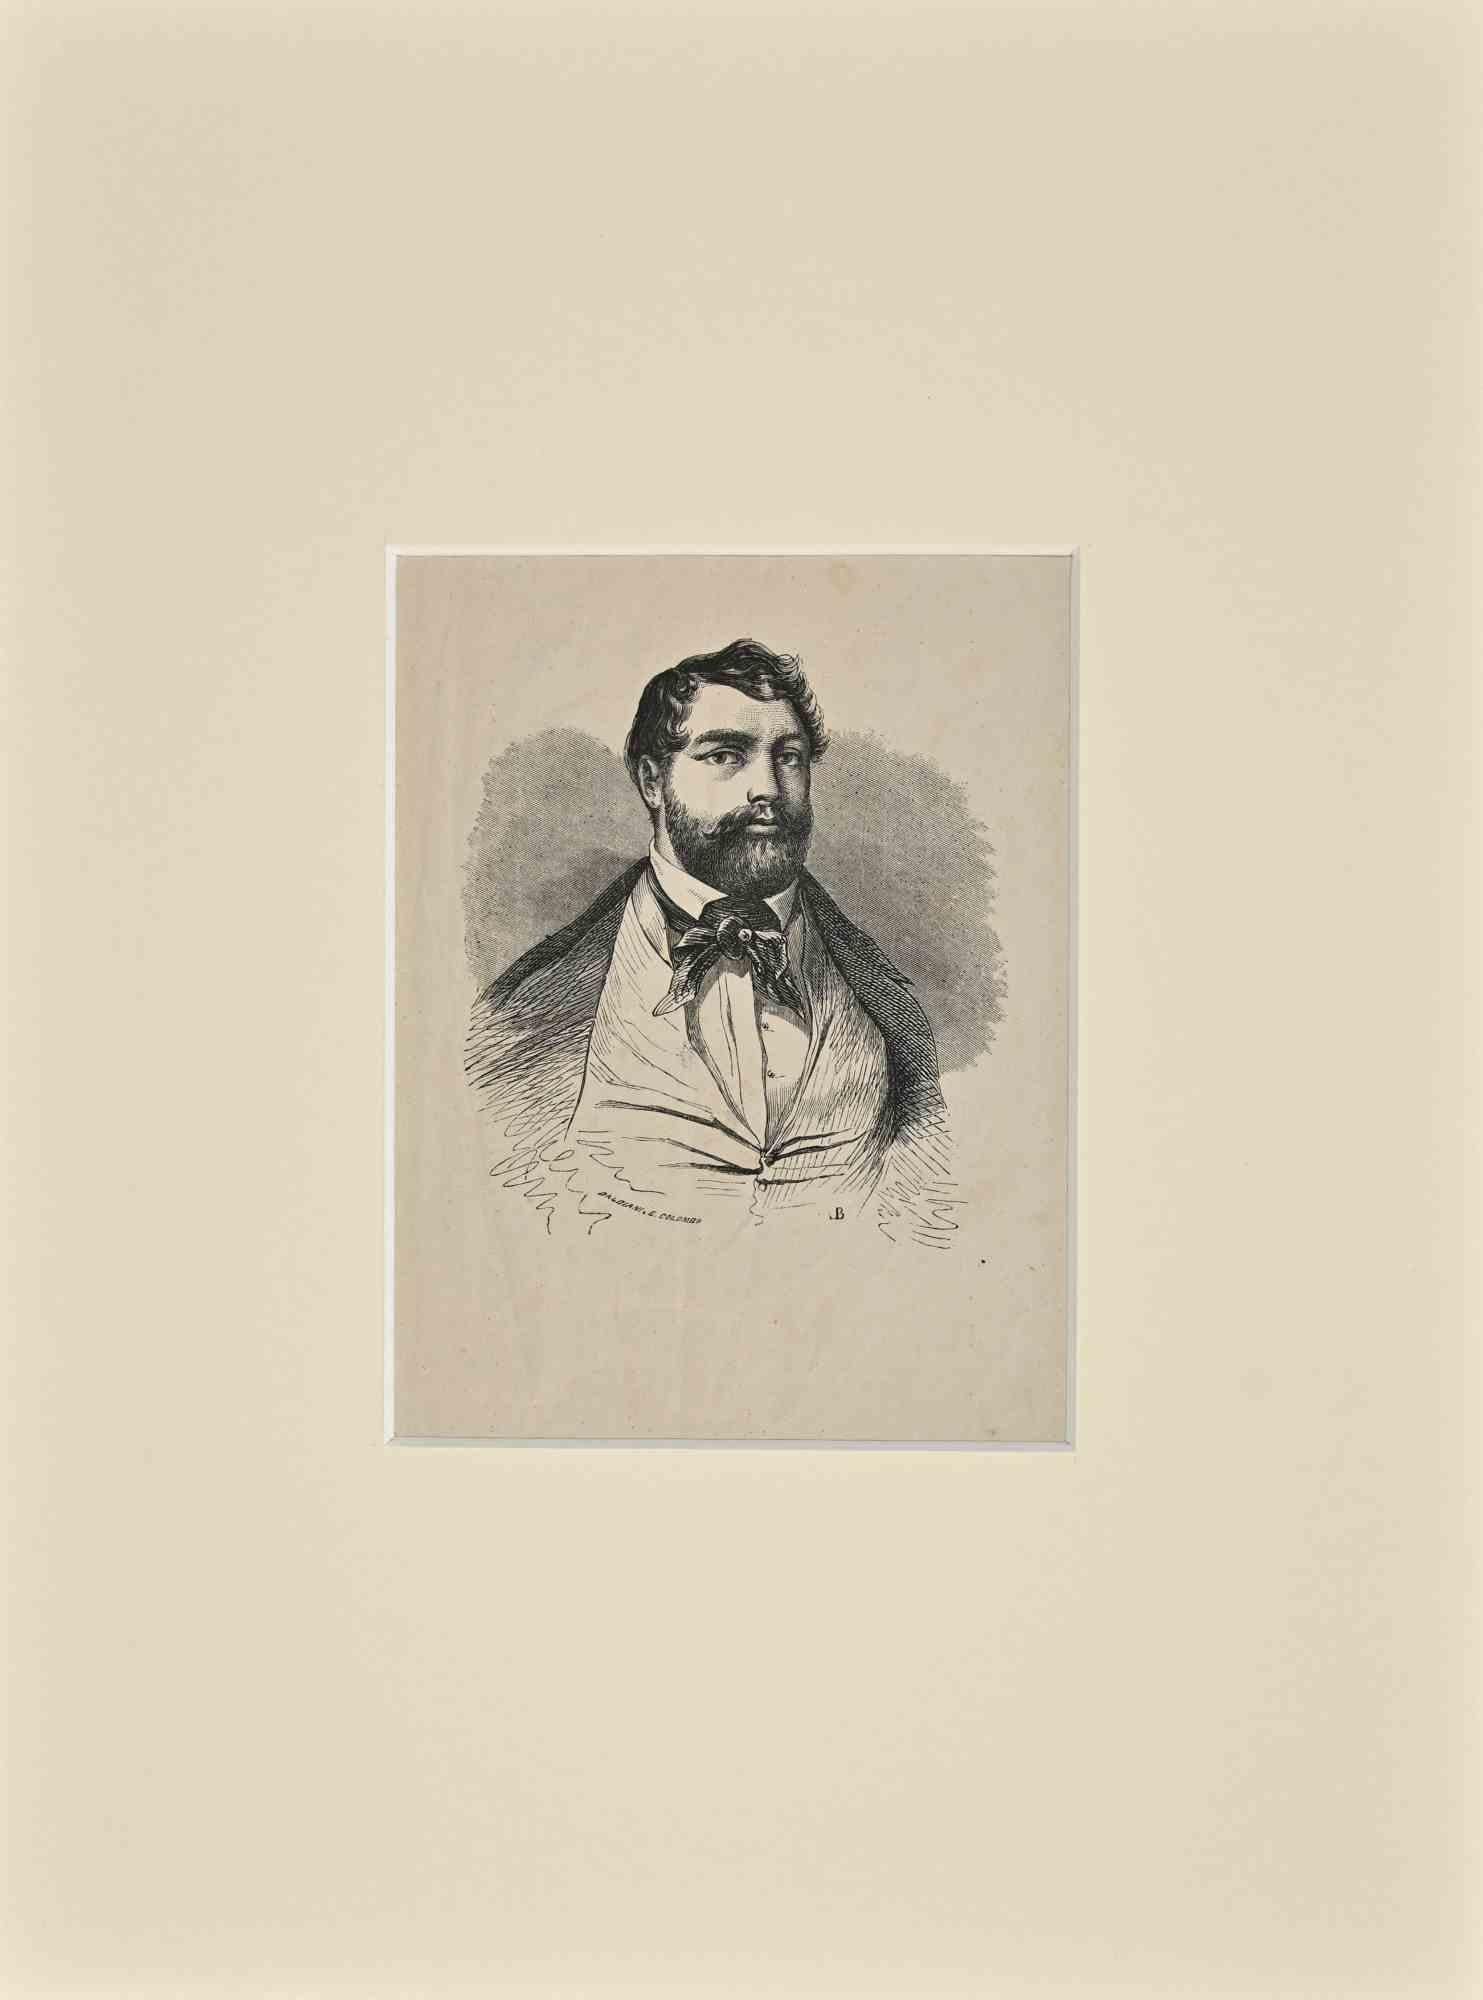 The Portrait is an original lithograph print on ivory-colored paper, realized in the 19th Century by Giuseppe Balbiani.

Signed on the plate

Good condition with some folding and a cutting.

The artwork realized through deft strokes by preciseness.